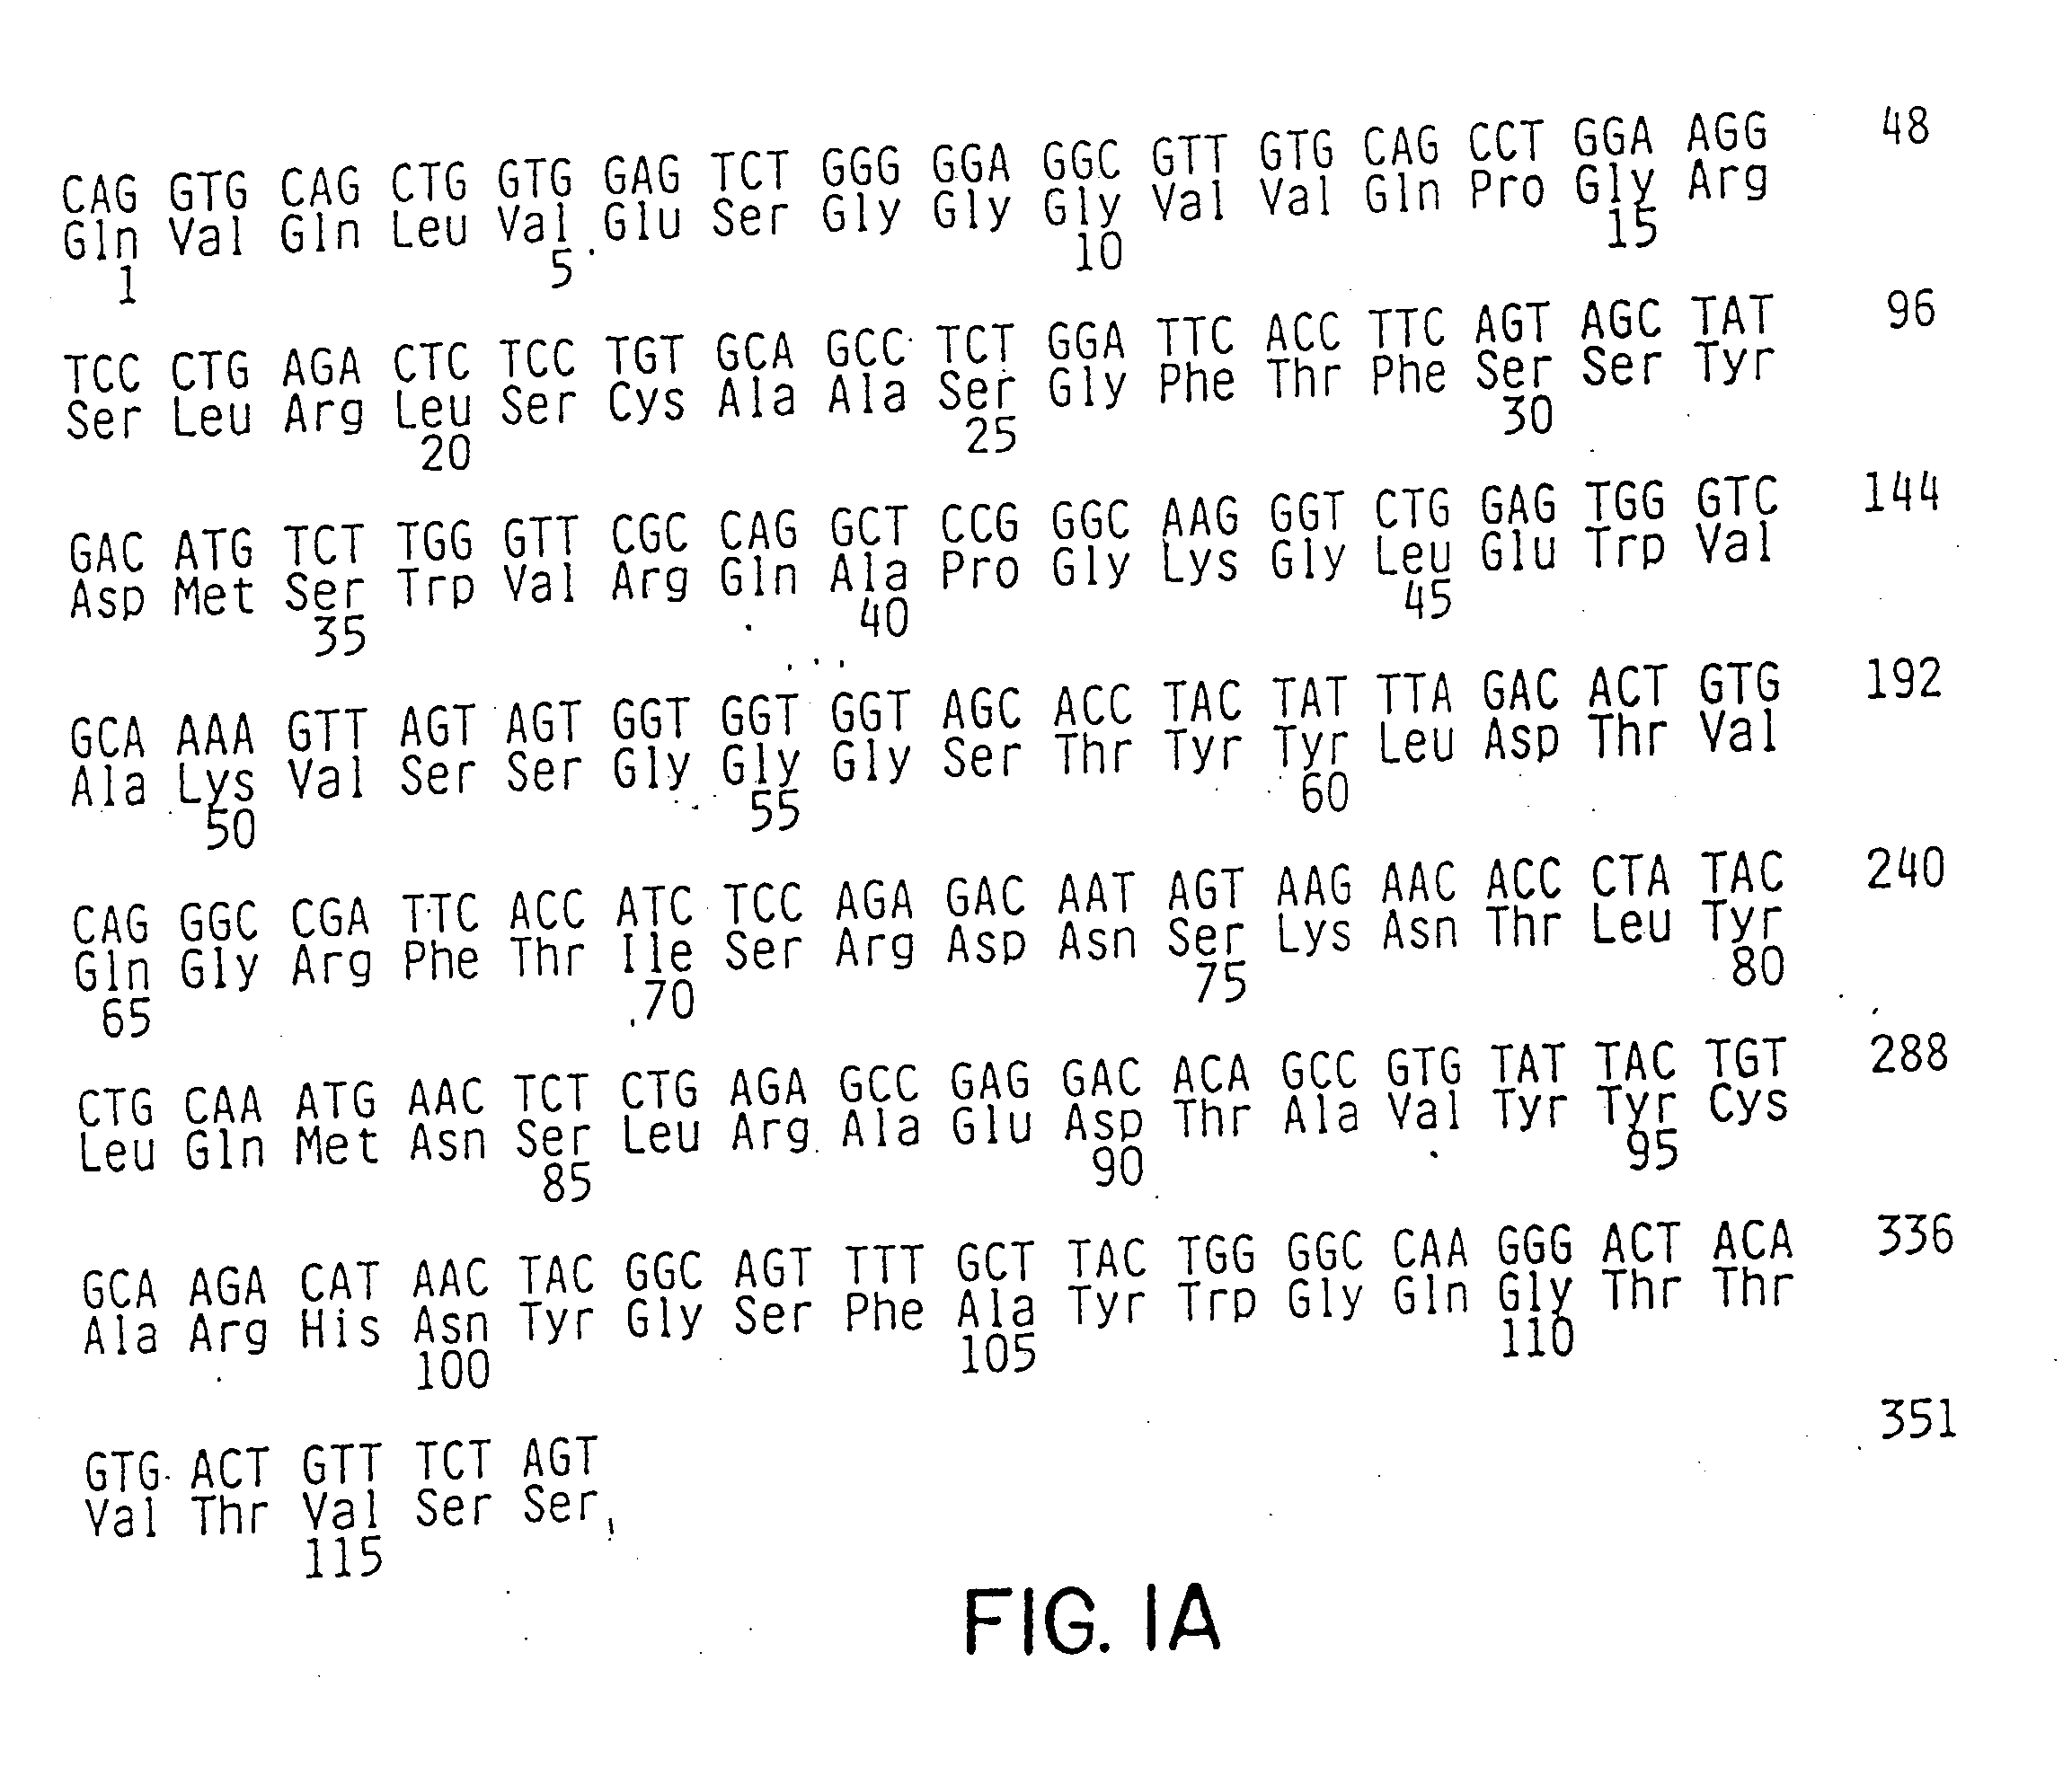 Methods of Preventing or Treating Inflammatory or Autoimmune Disorders by Administering Integrin ALPHAVBETA3 Antogonists in Combination with other Prophylactic or Therapeutic Agents